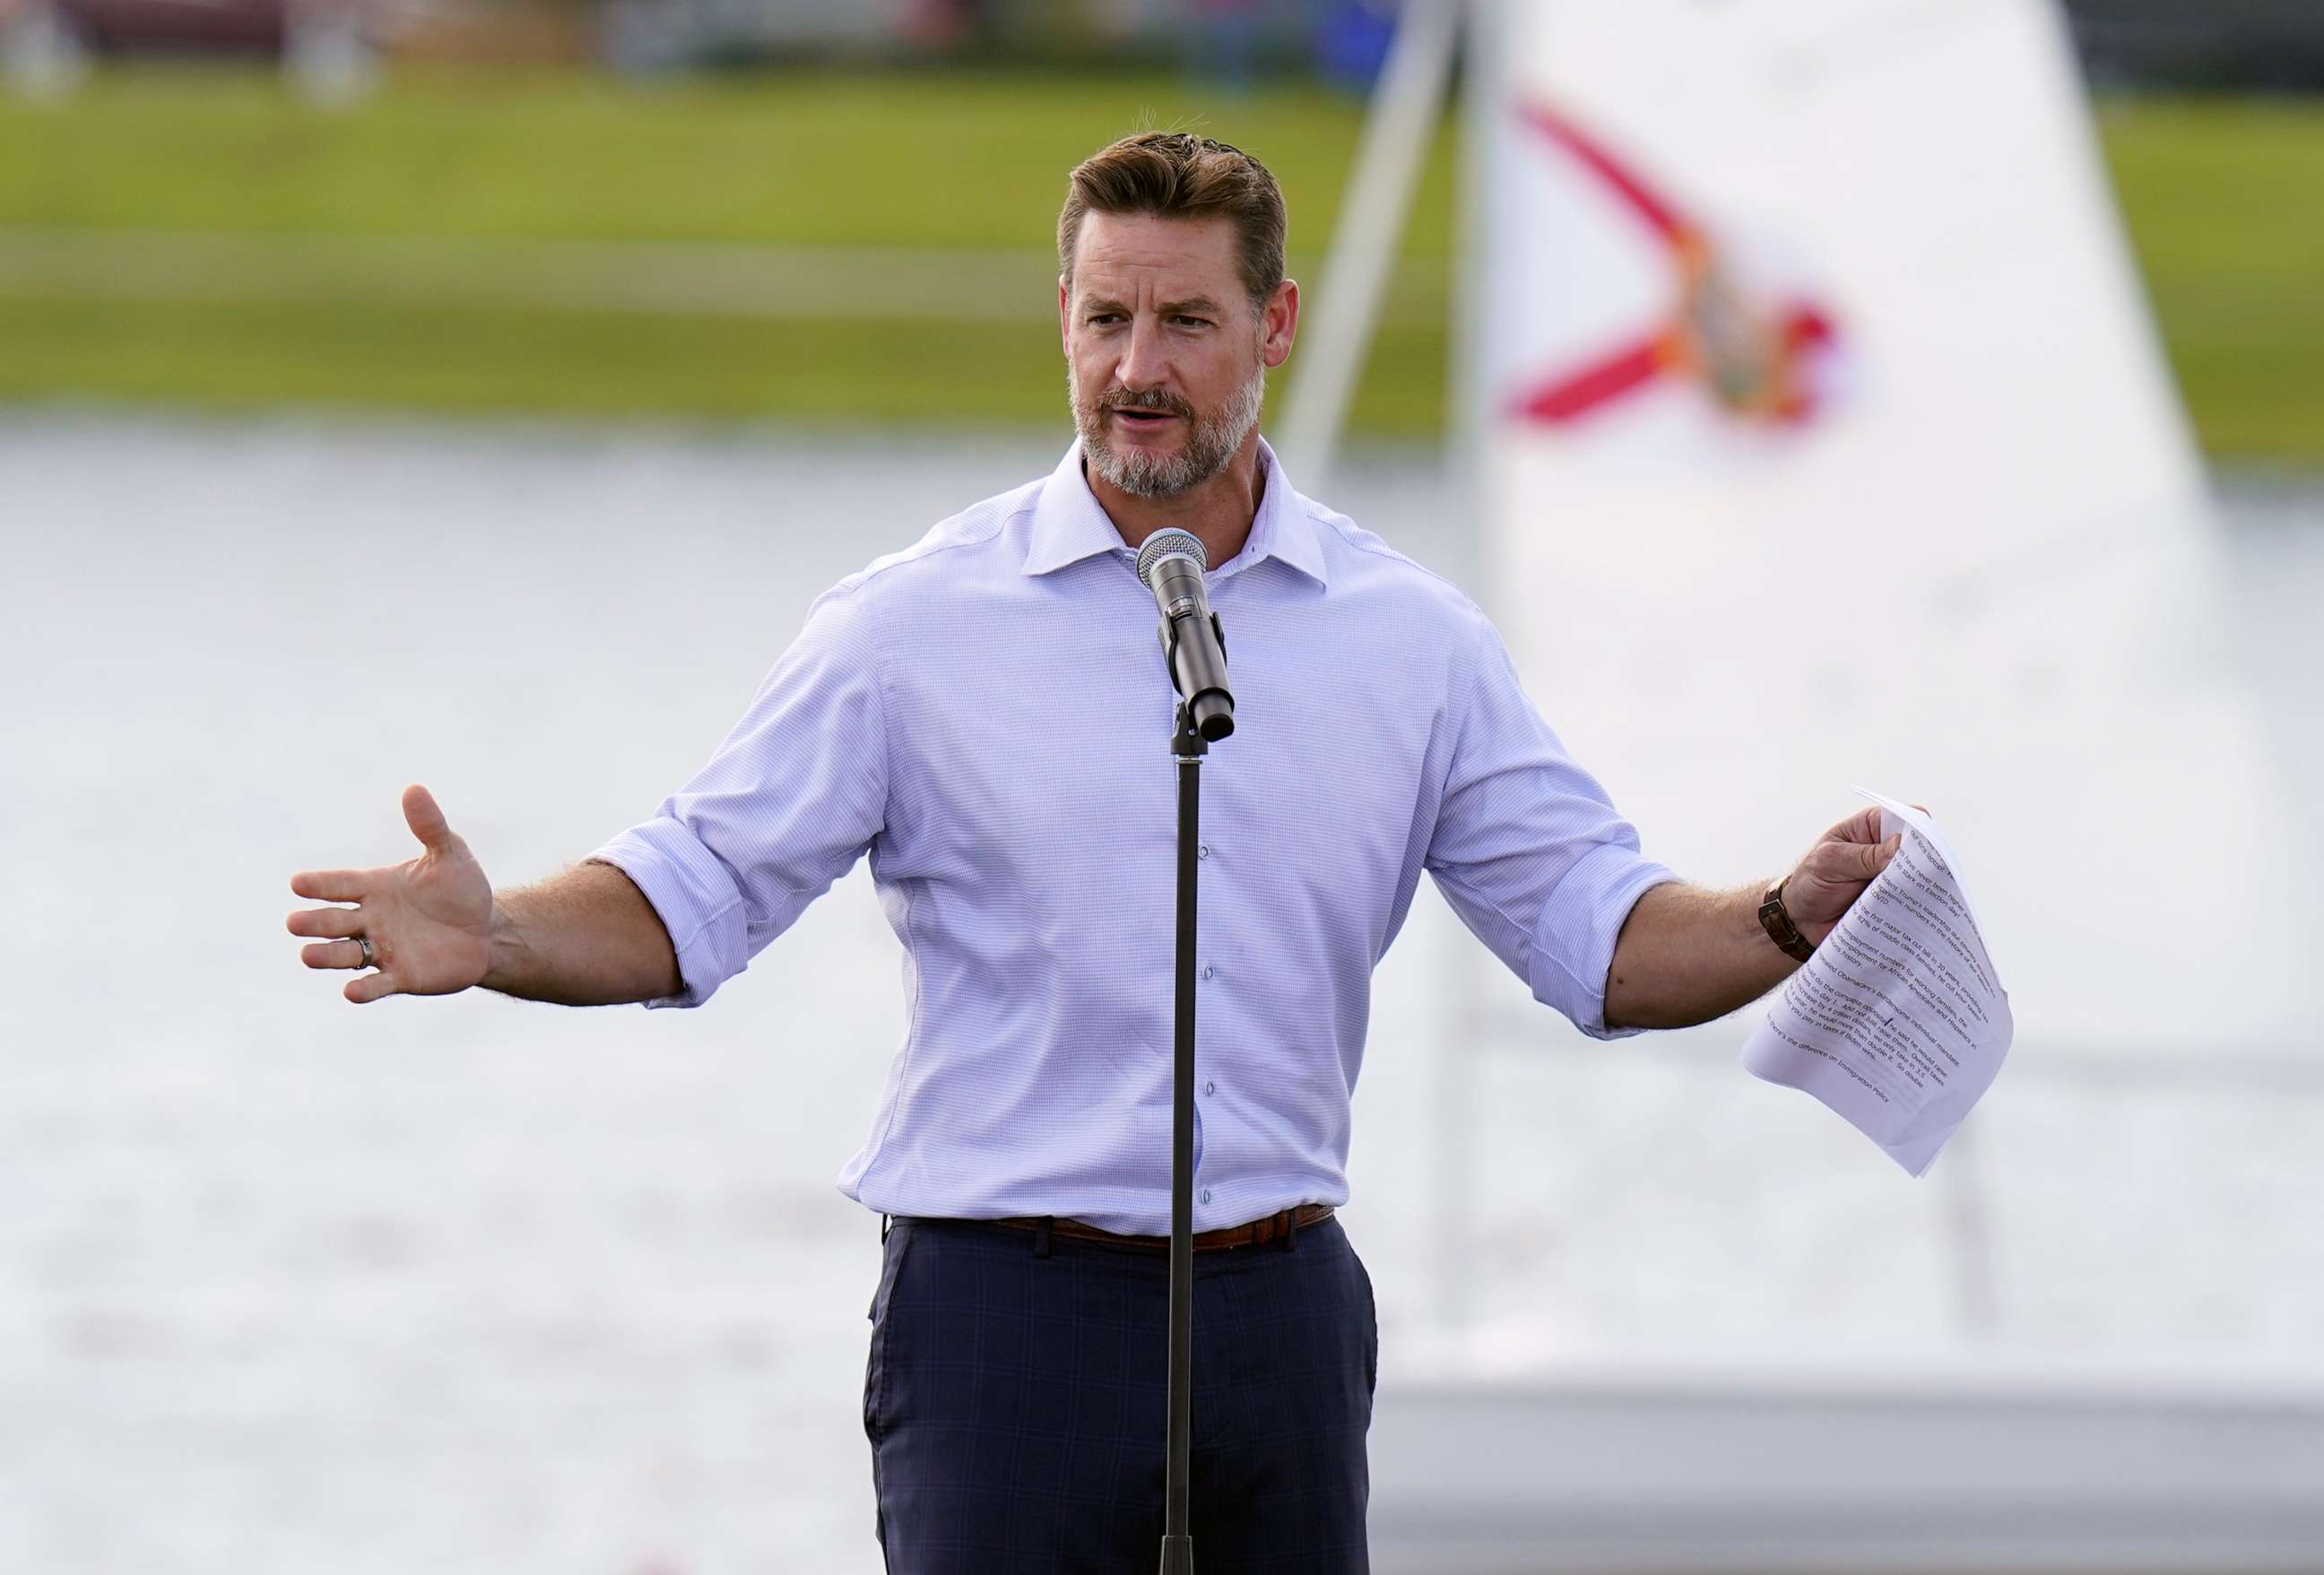 PHOTO: In this Oct. 27, 2020 file photo Rep. Greg Steube speaks during a campaign event, in Sarasota, Fla.